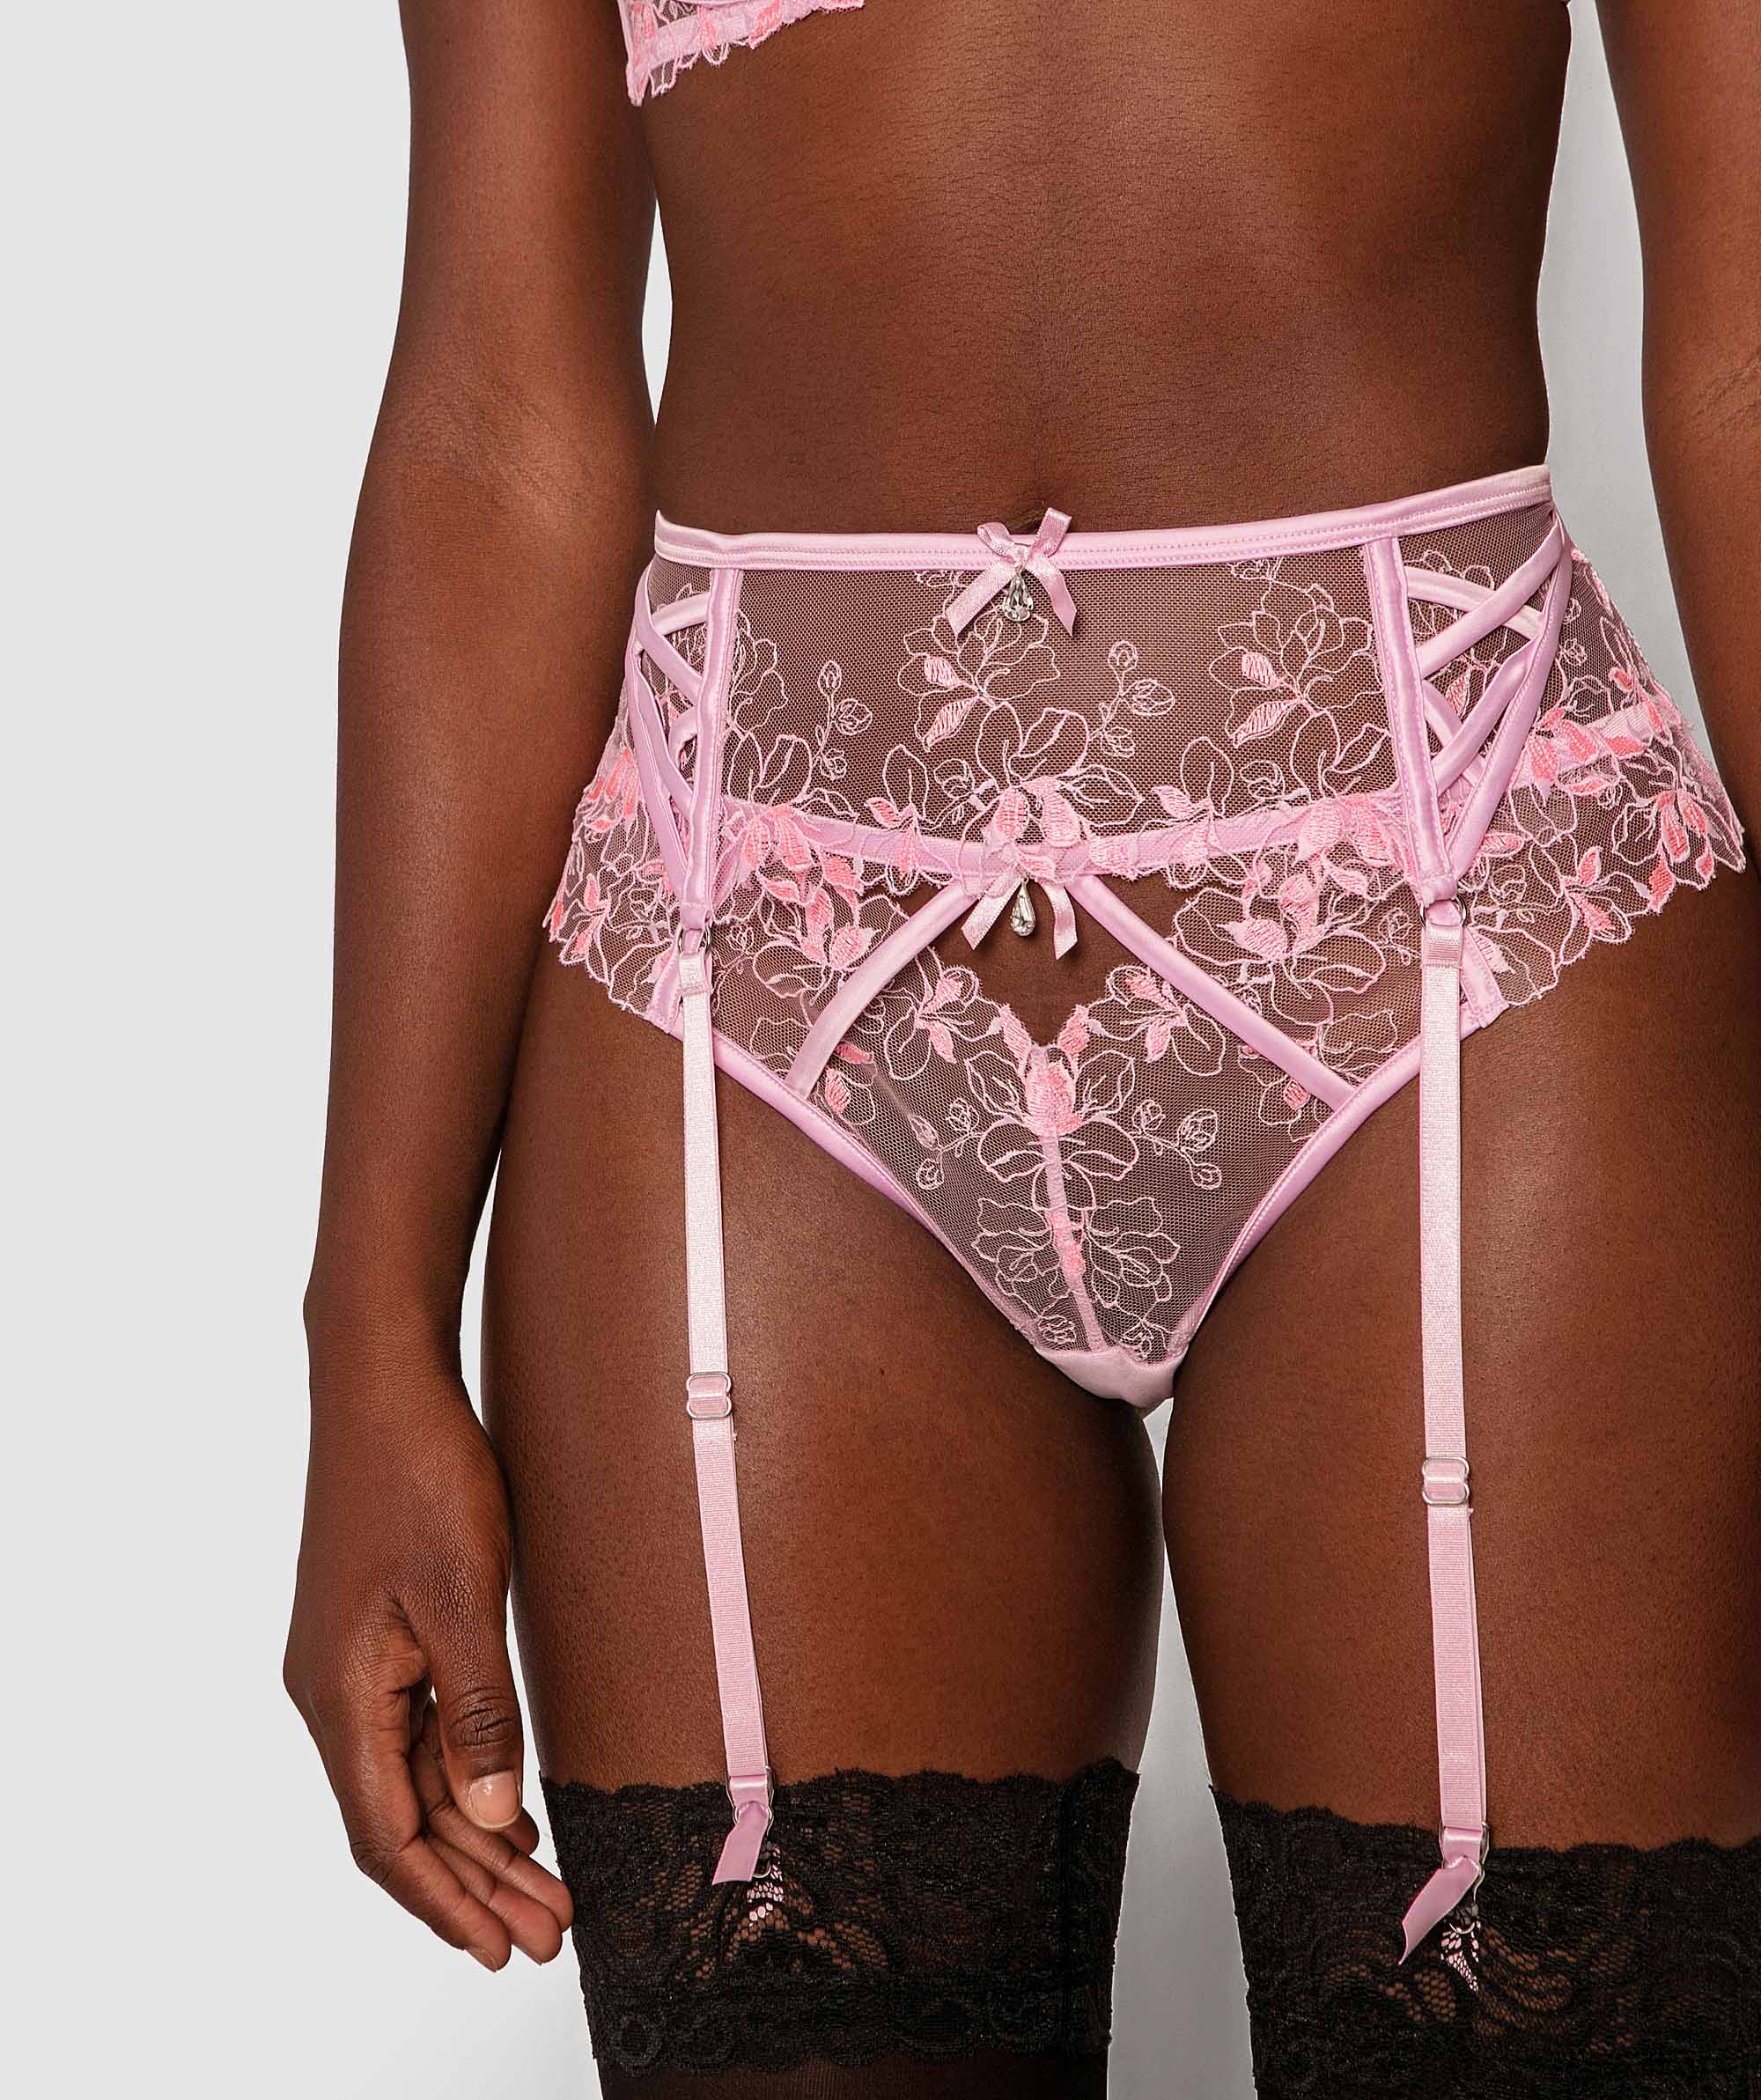 Enchanted Cherry Blossom Avenue Suspender - Lilac/Pink